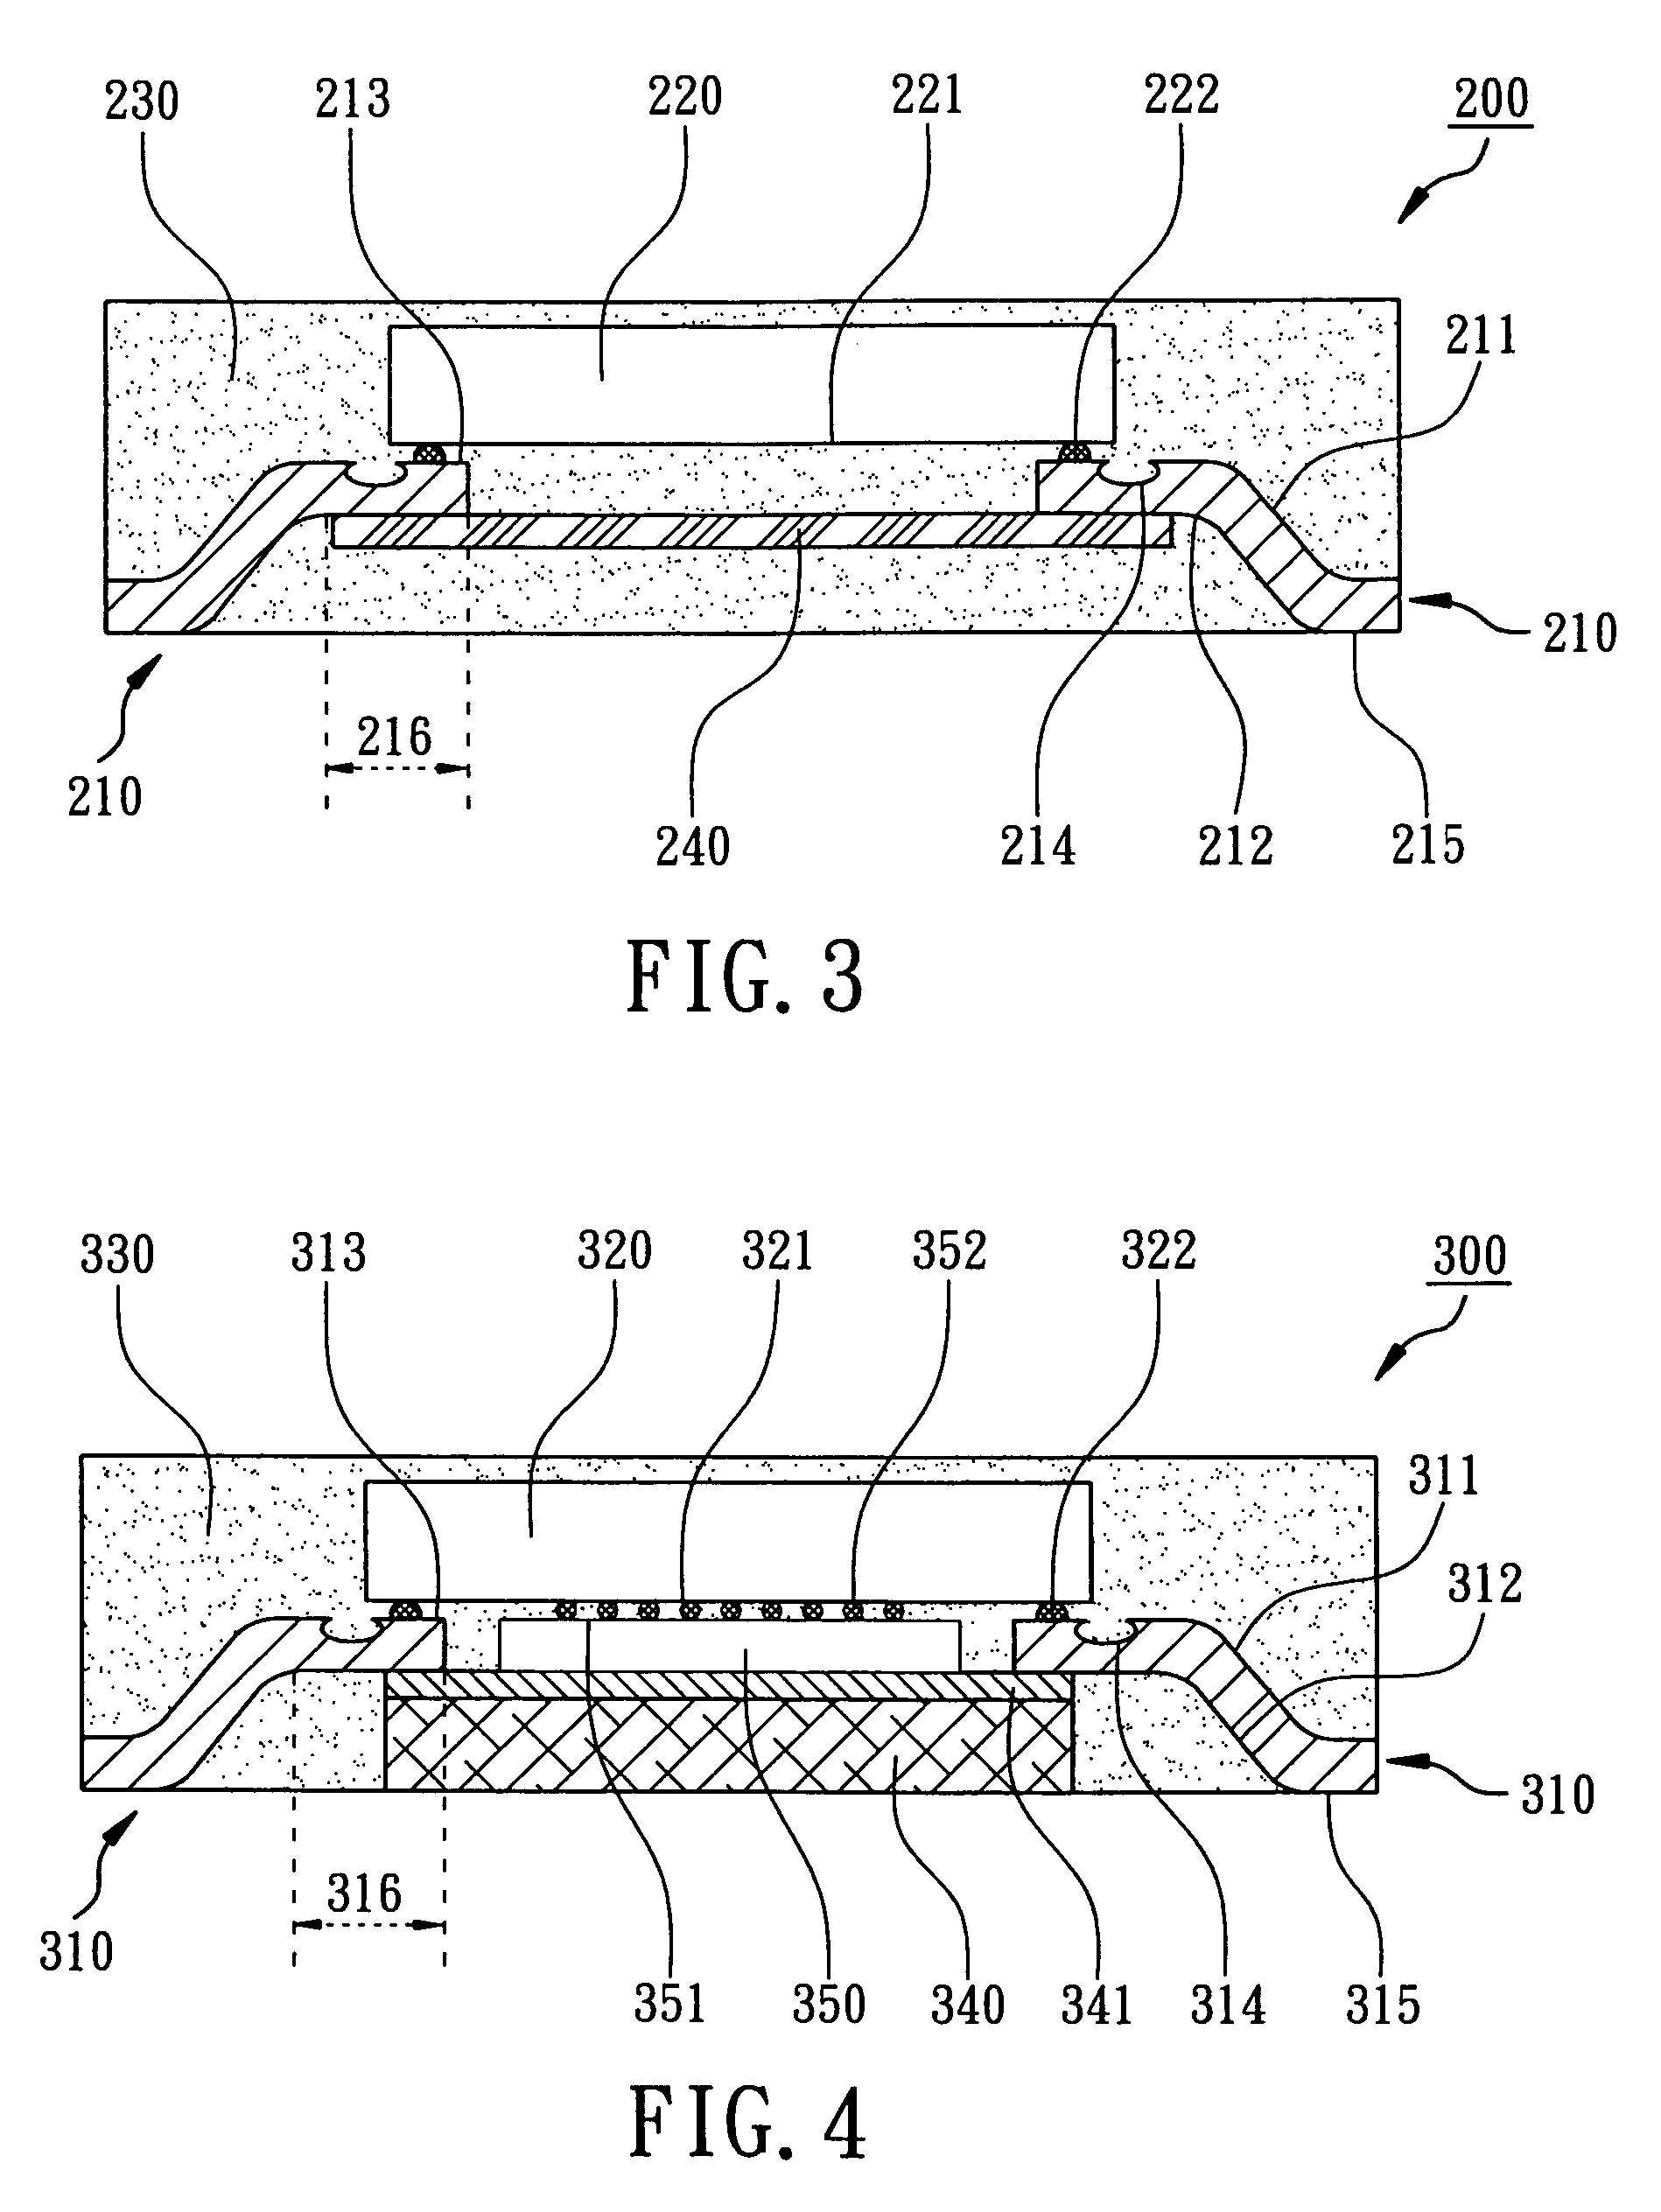 Semiconductor package with a flip chip on a solder-resist leadframe